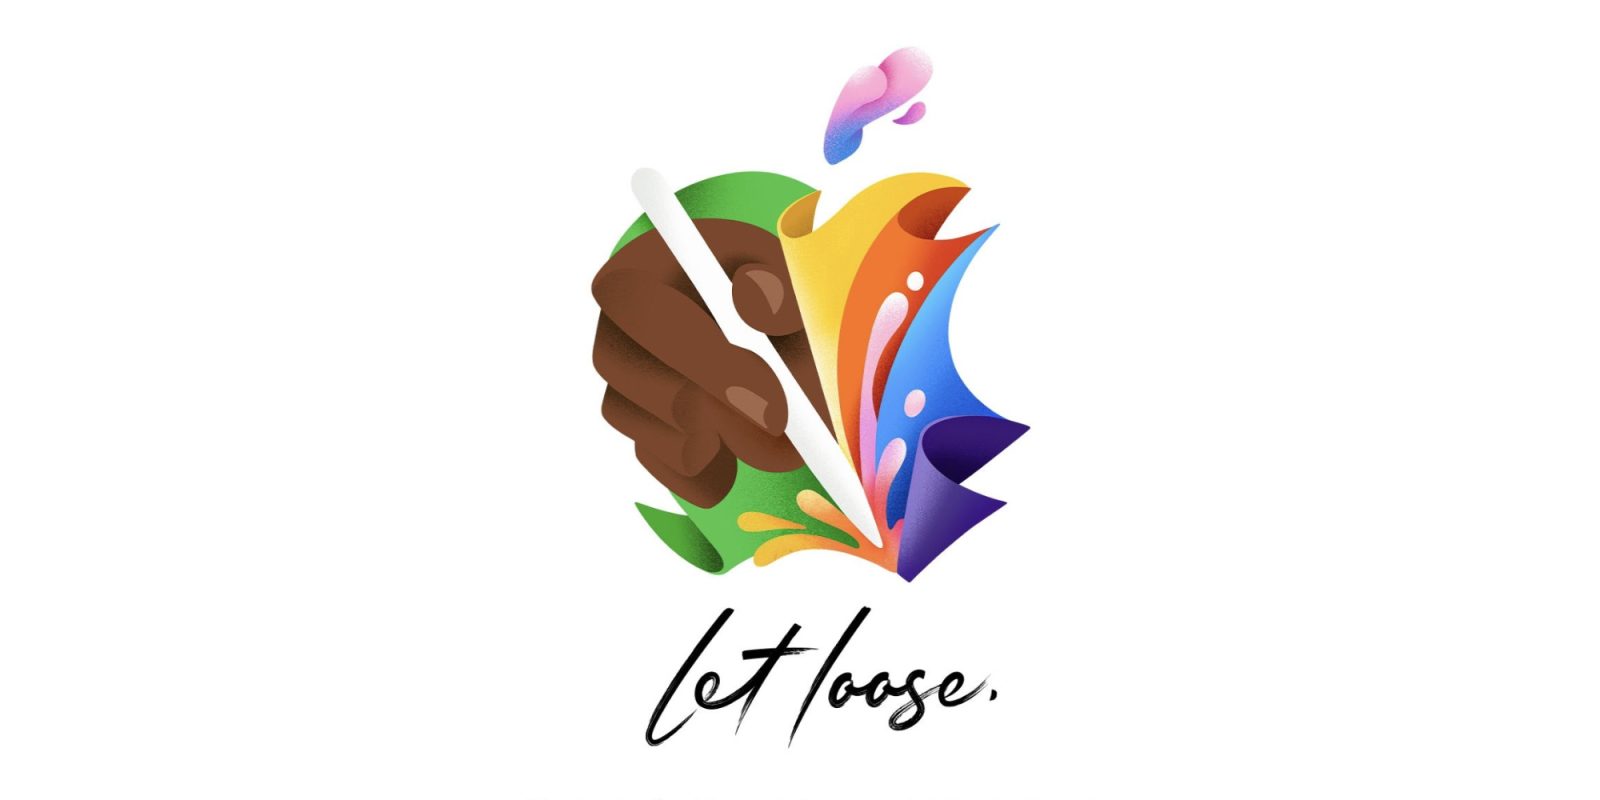 Apple announces special event for May 7: 'Let Loose' - 9to5Mac